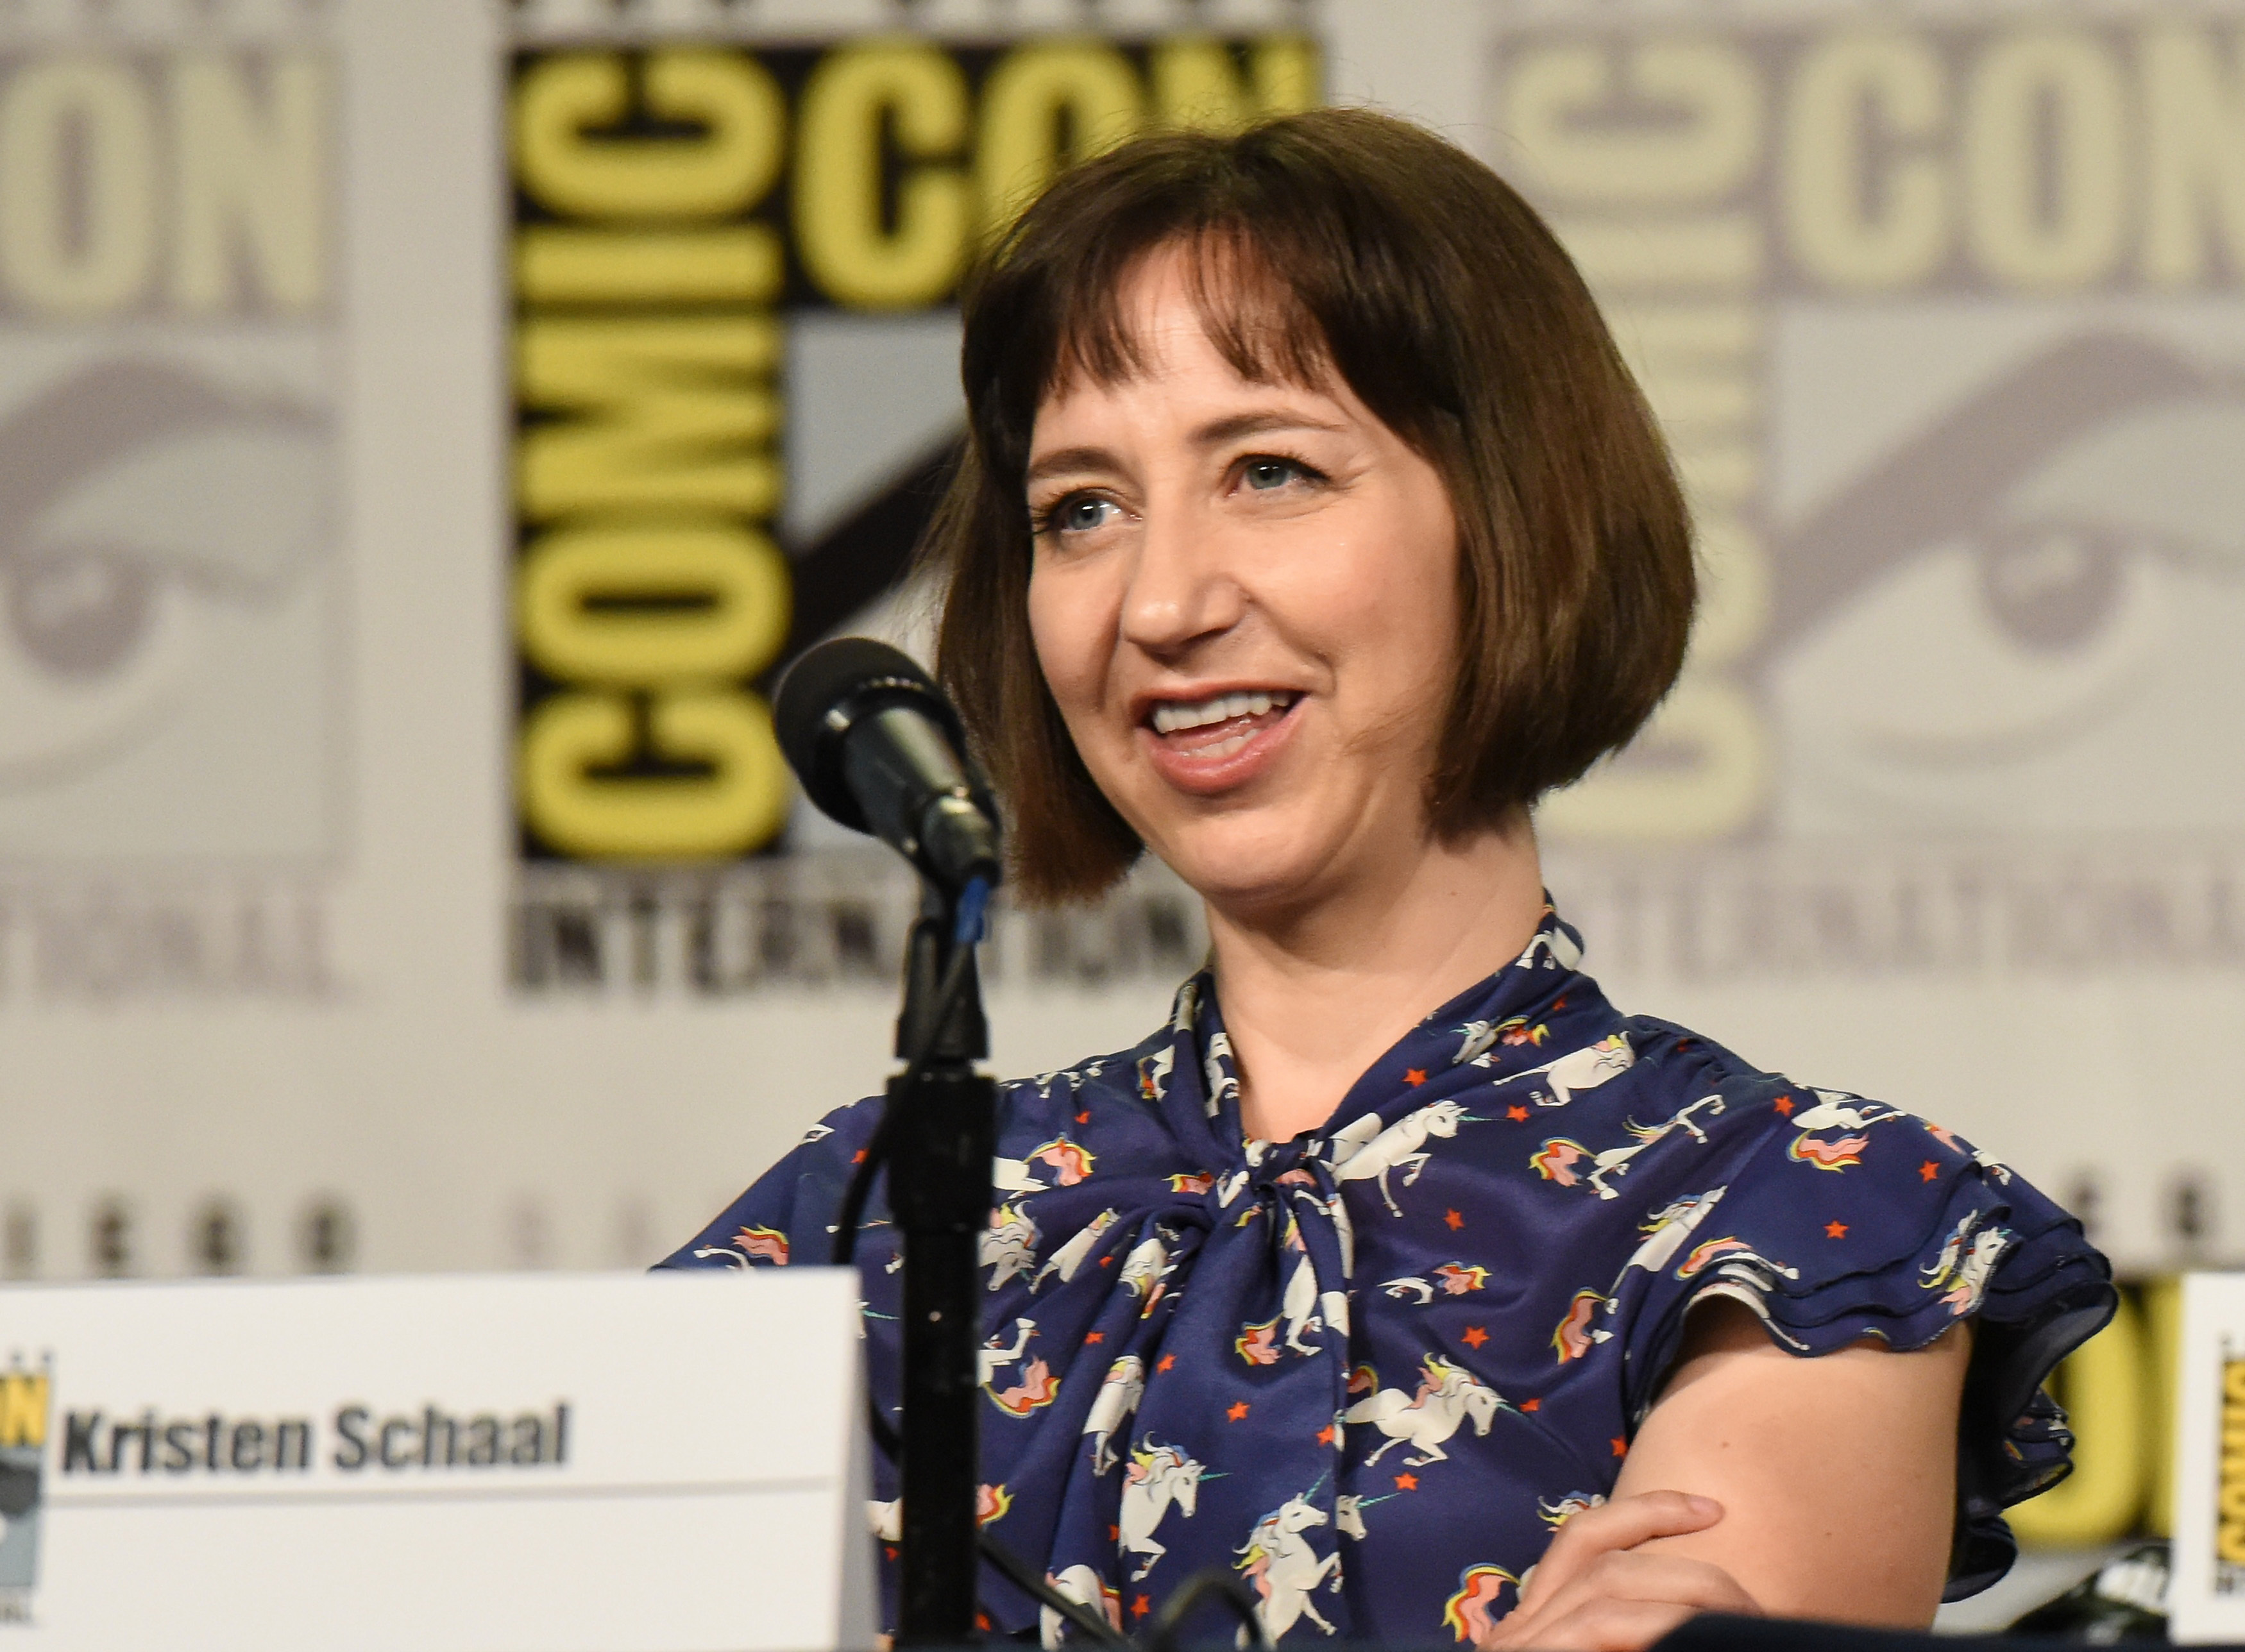 kristen schaal tells john teti why playing video games is very tough for her